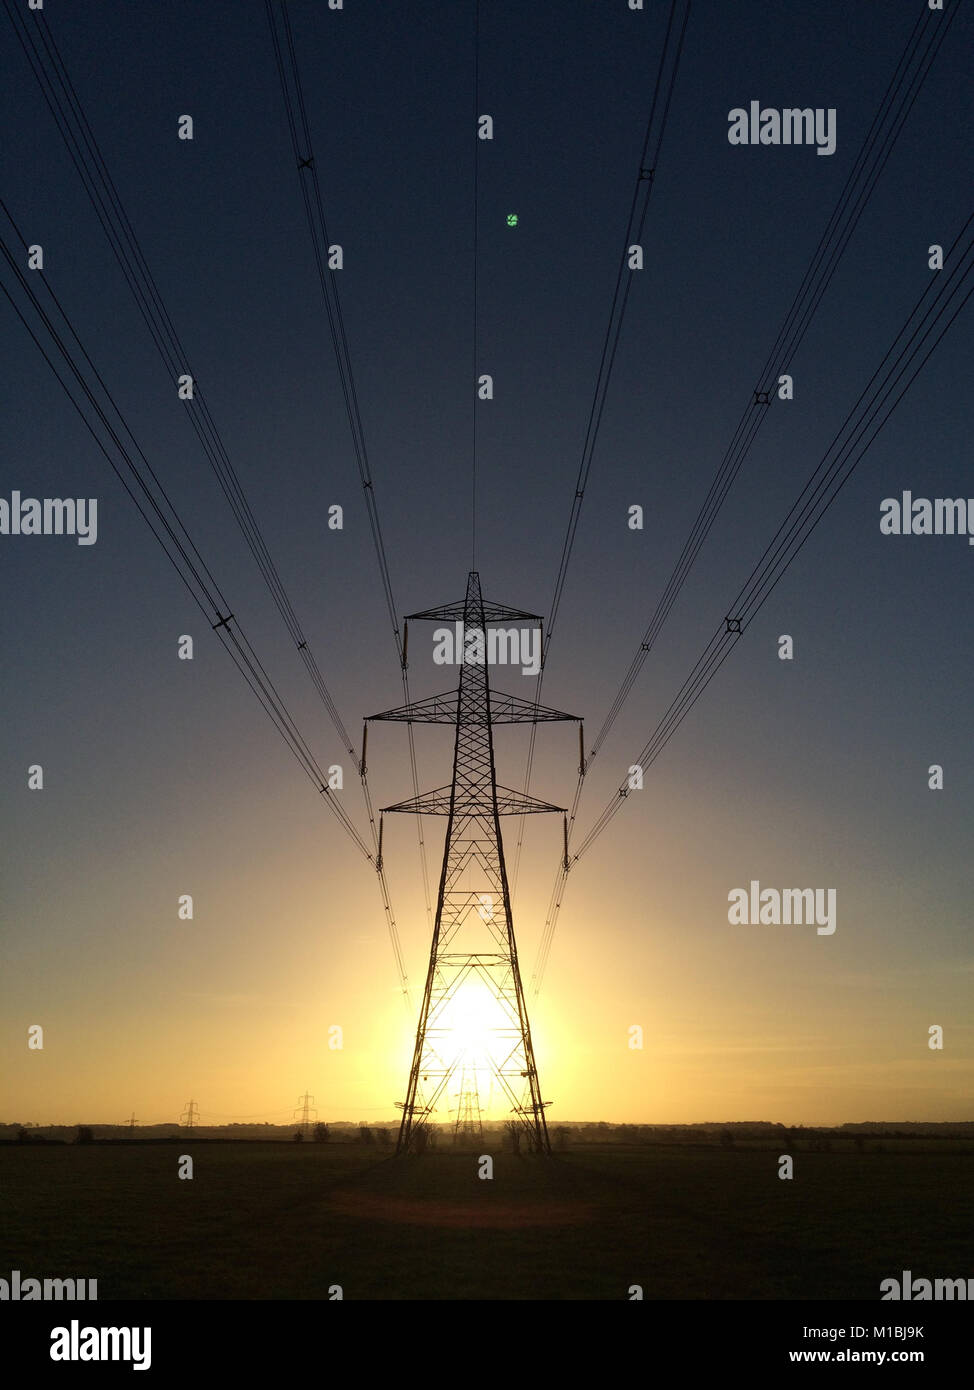 Electricity pylon at sunrise with sun bursting though showing energy and light. Stock Photo